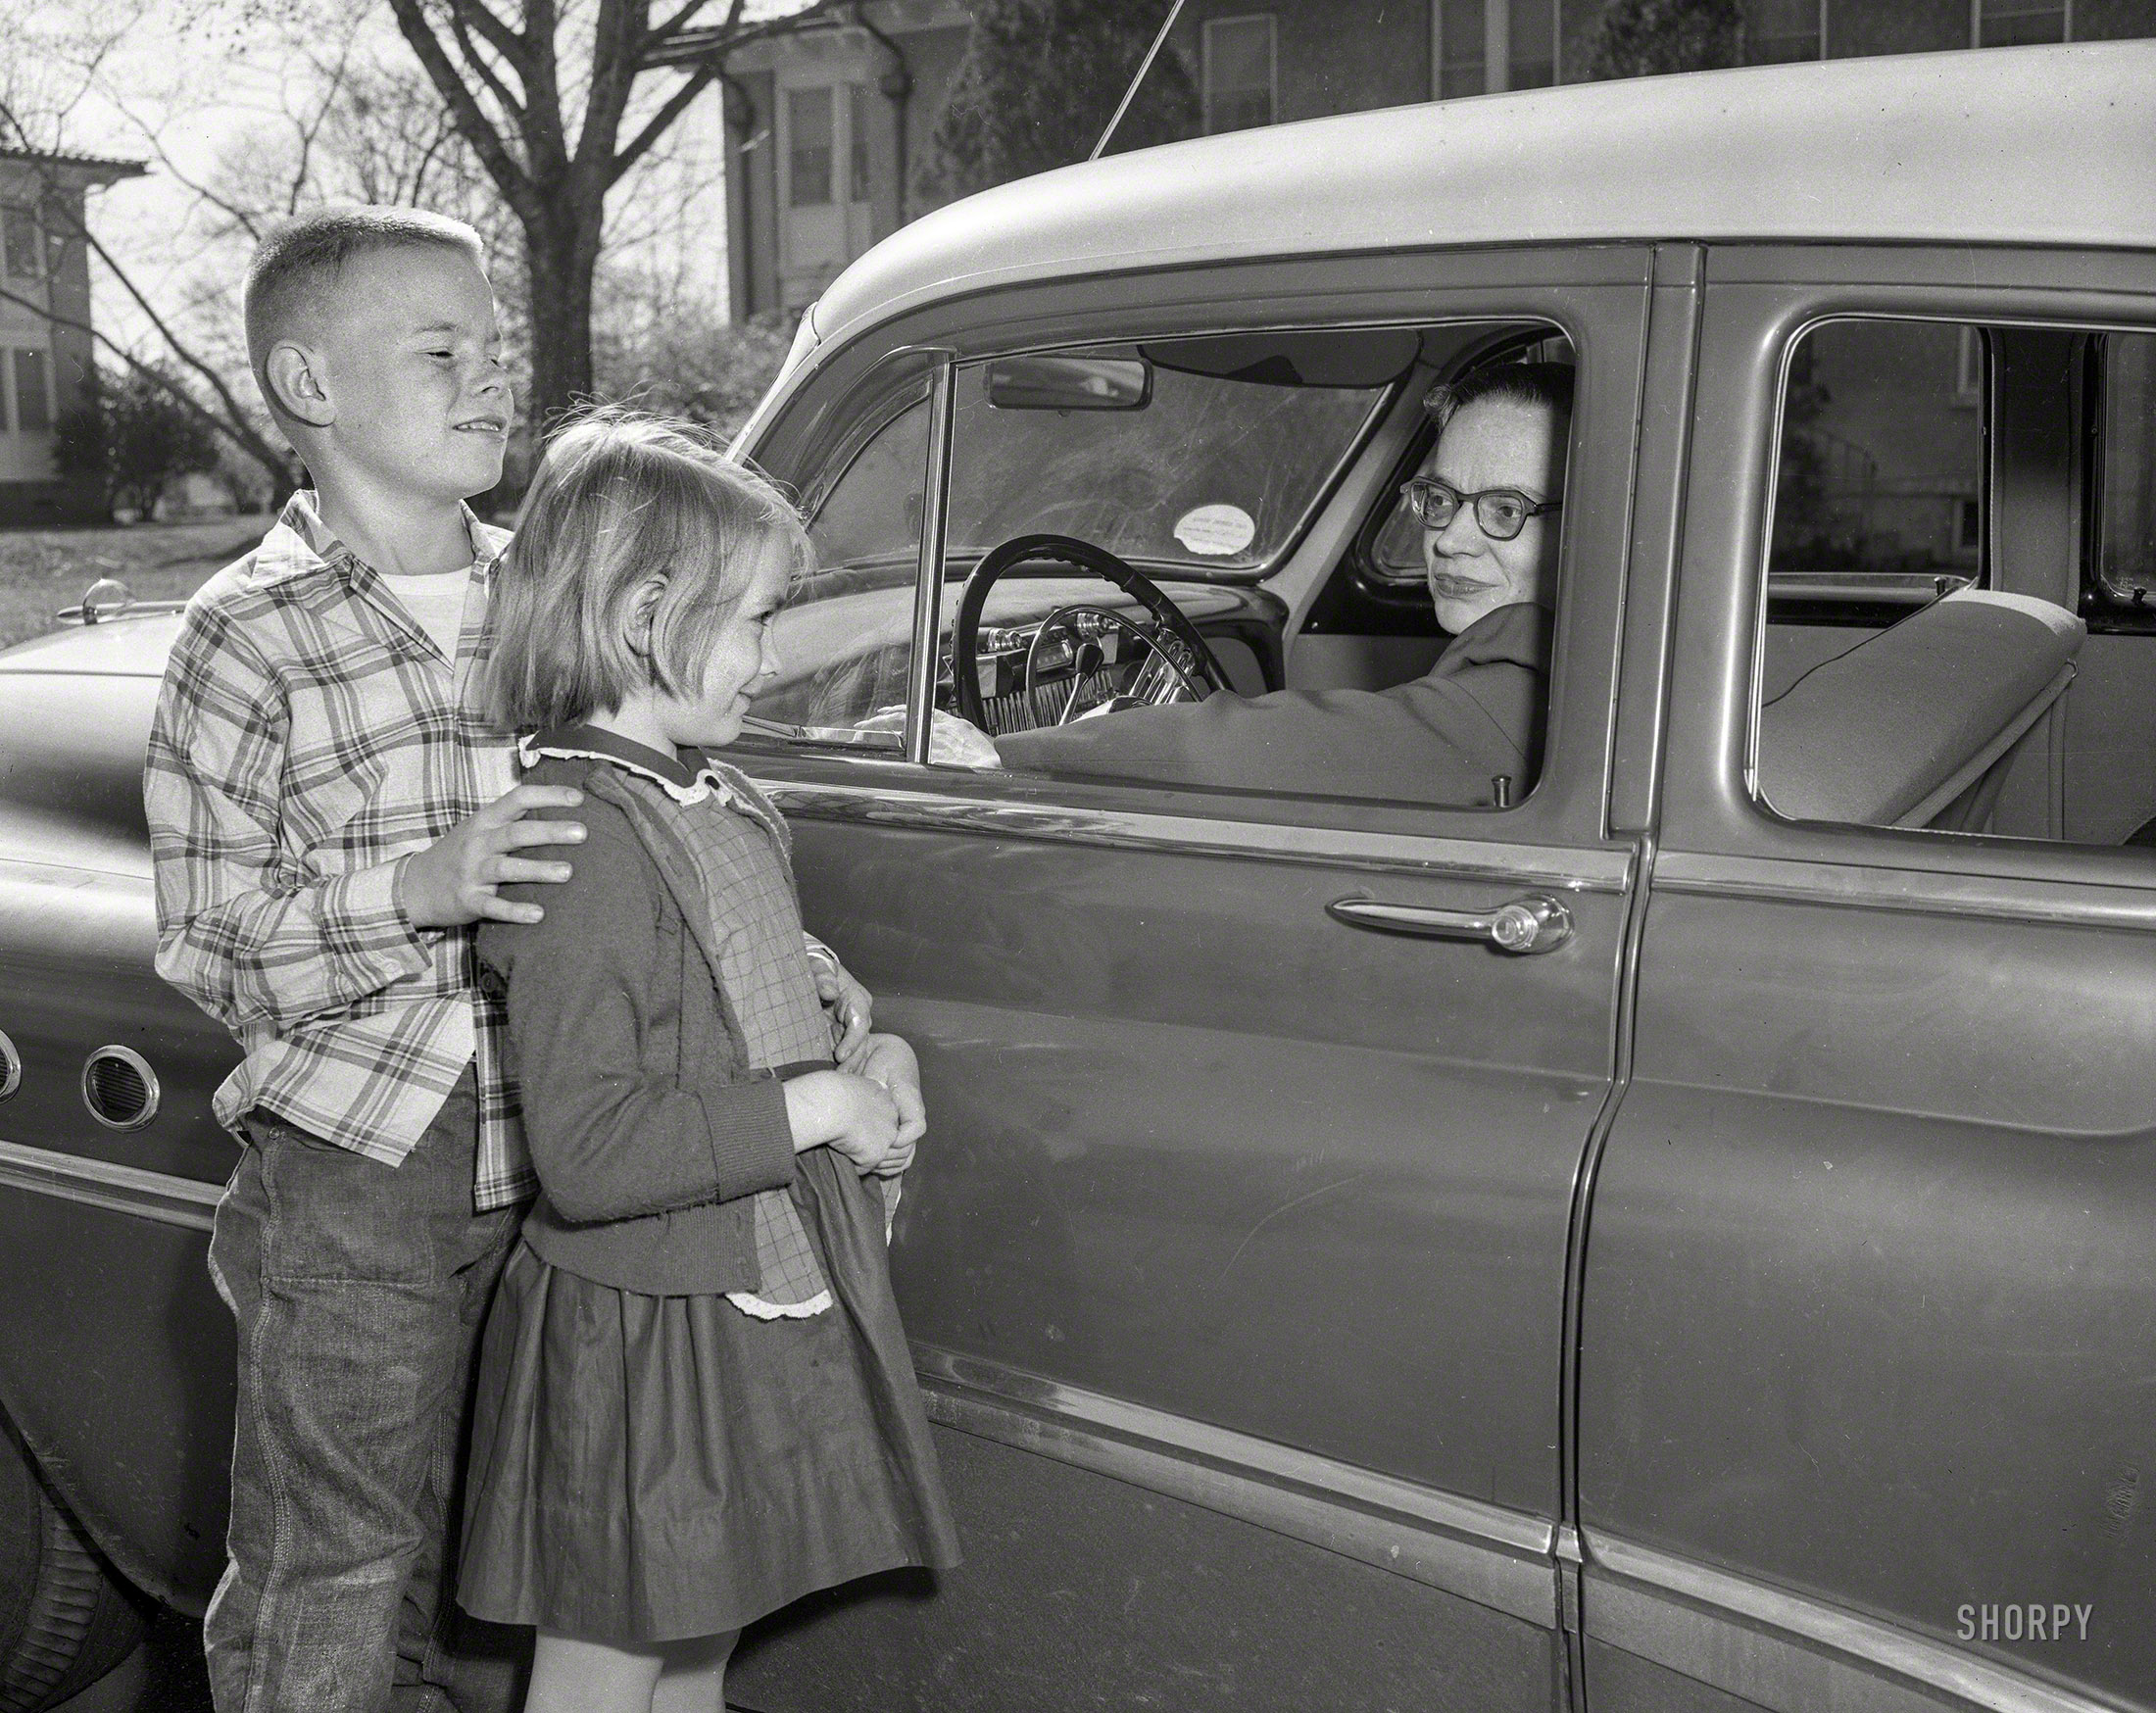 From circa 1955 Columbus, Georgia, comes this uncaptioned snap of two youngsters interacting with an authority figure driving a Buick. Where to, kids? 4x5 inch acetate negative from the Shorpy News Photo Archive. View full size.